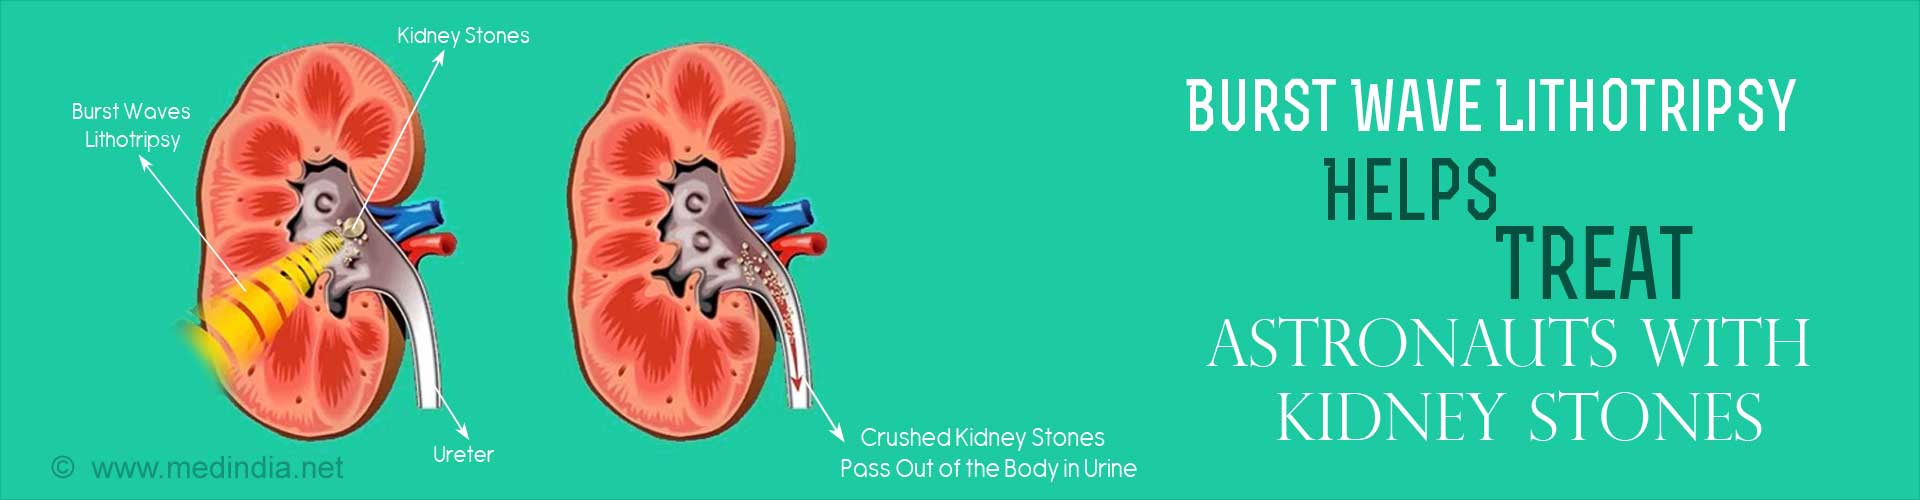 burst wave lithotripsy helps treat astronauts with kidney stones